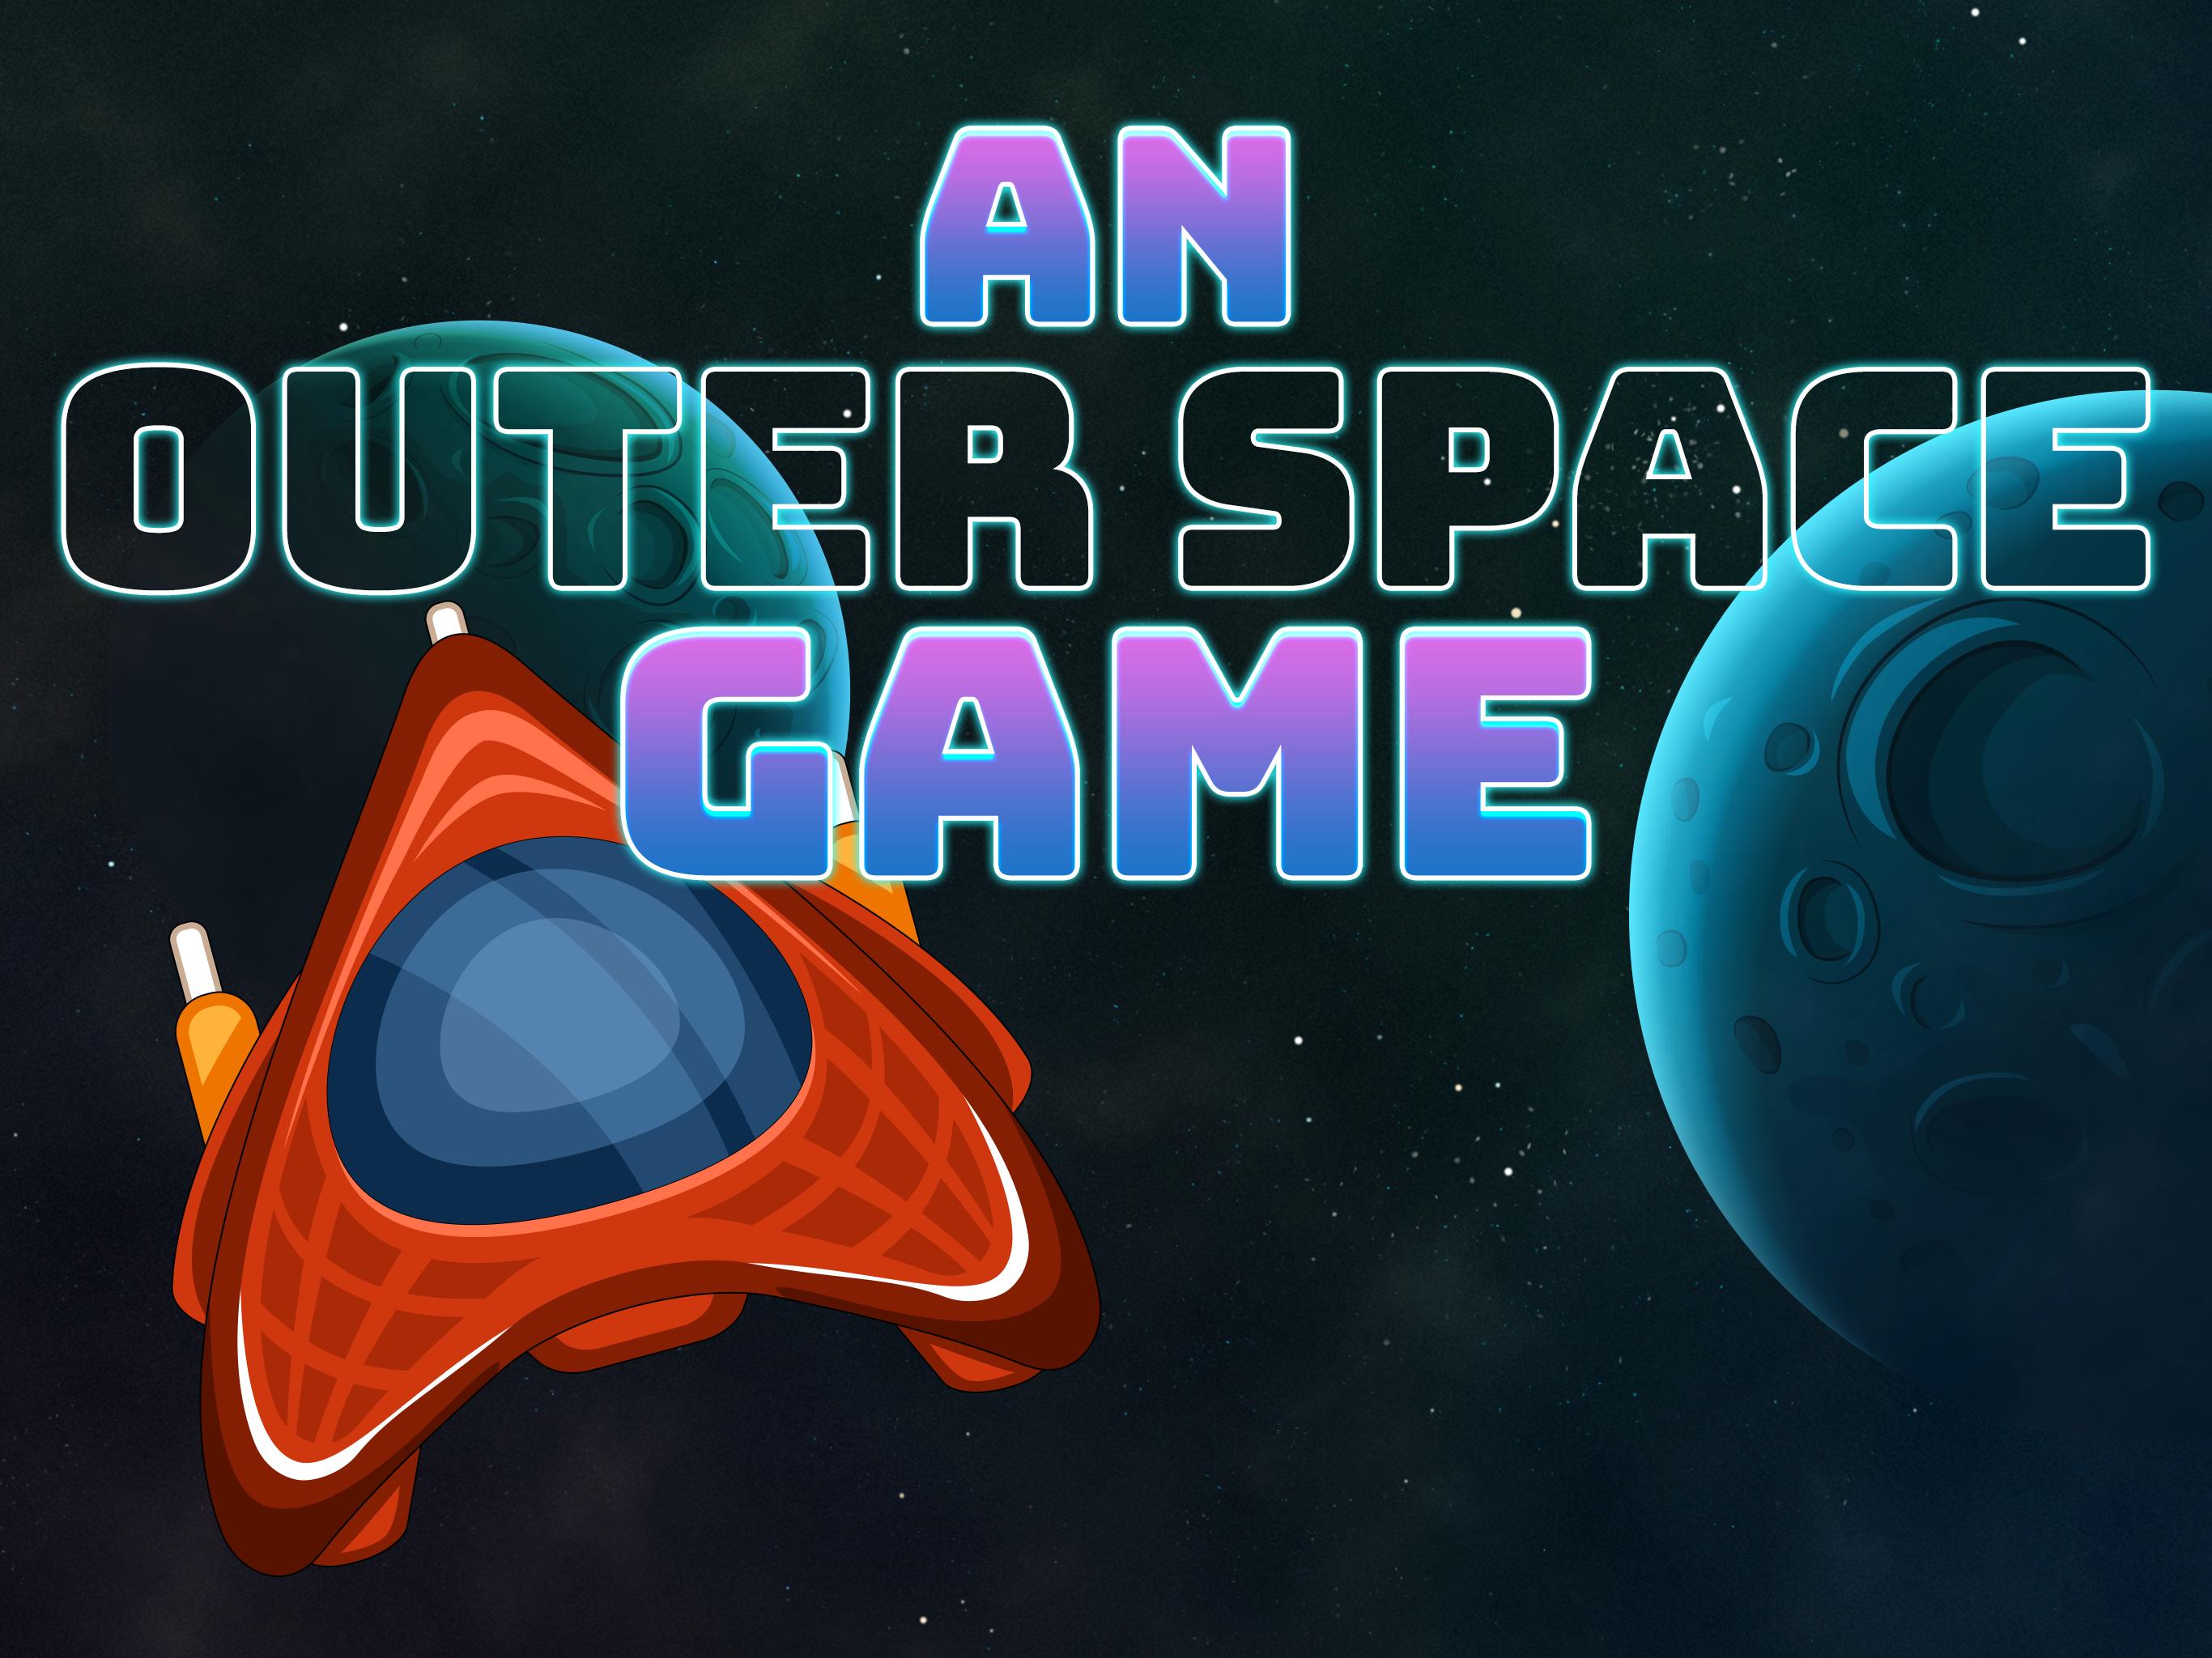 Outer space game